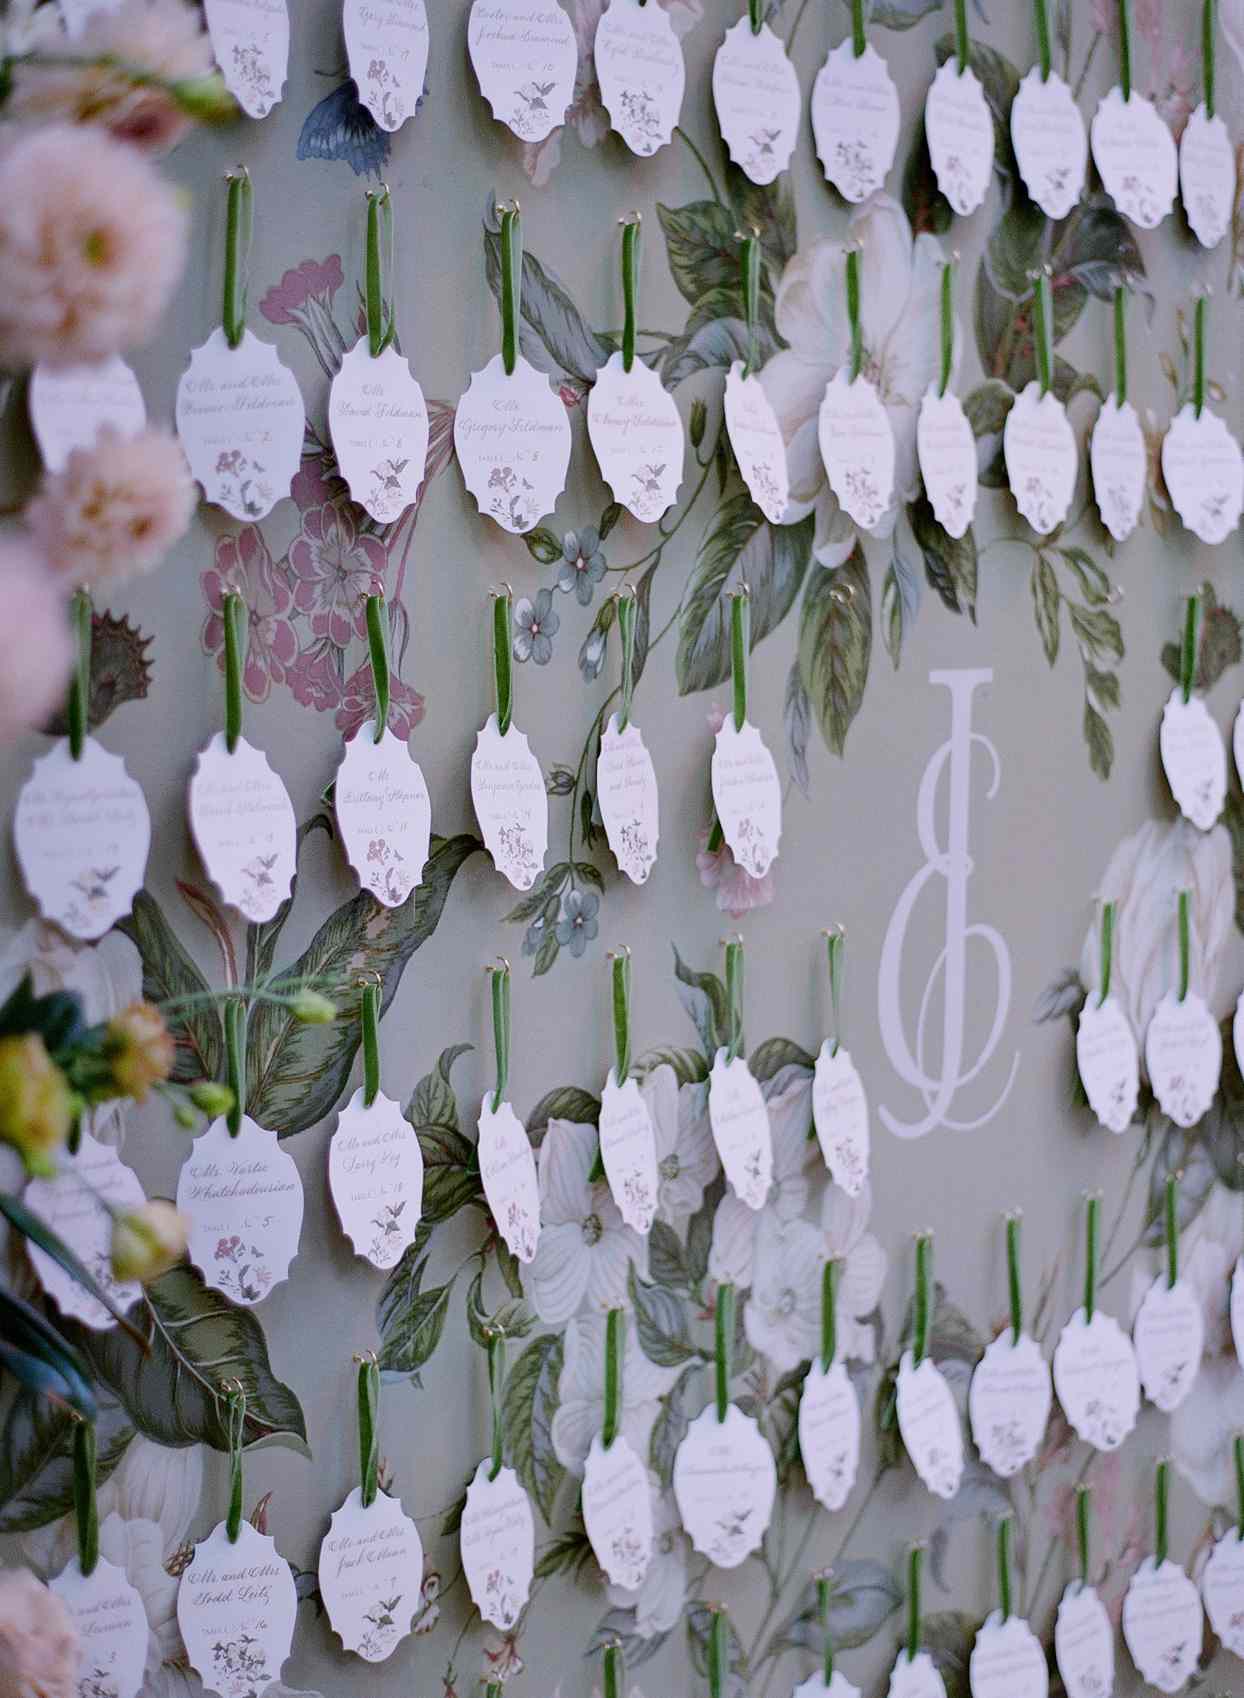 cut out elegant place cards hanging on wall